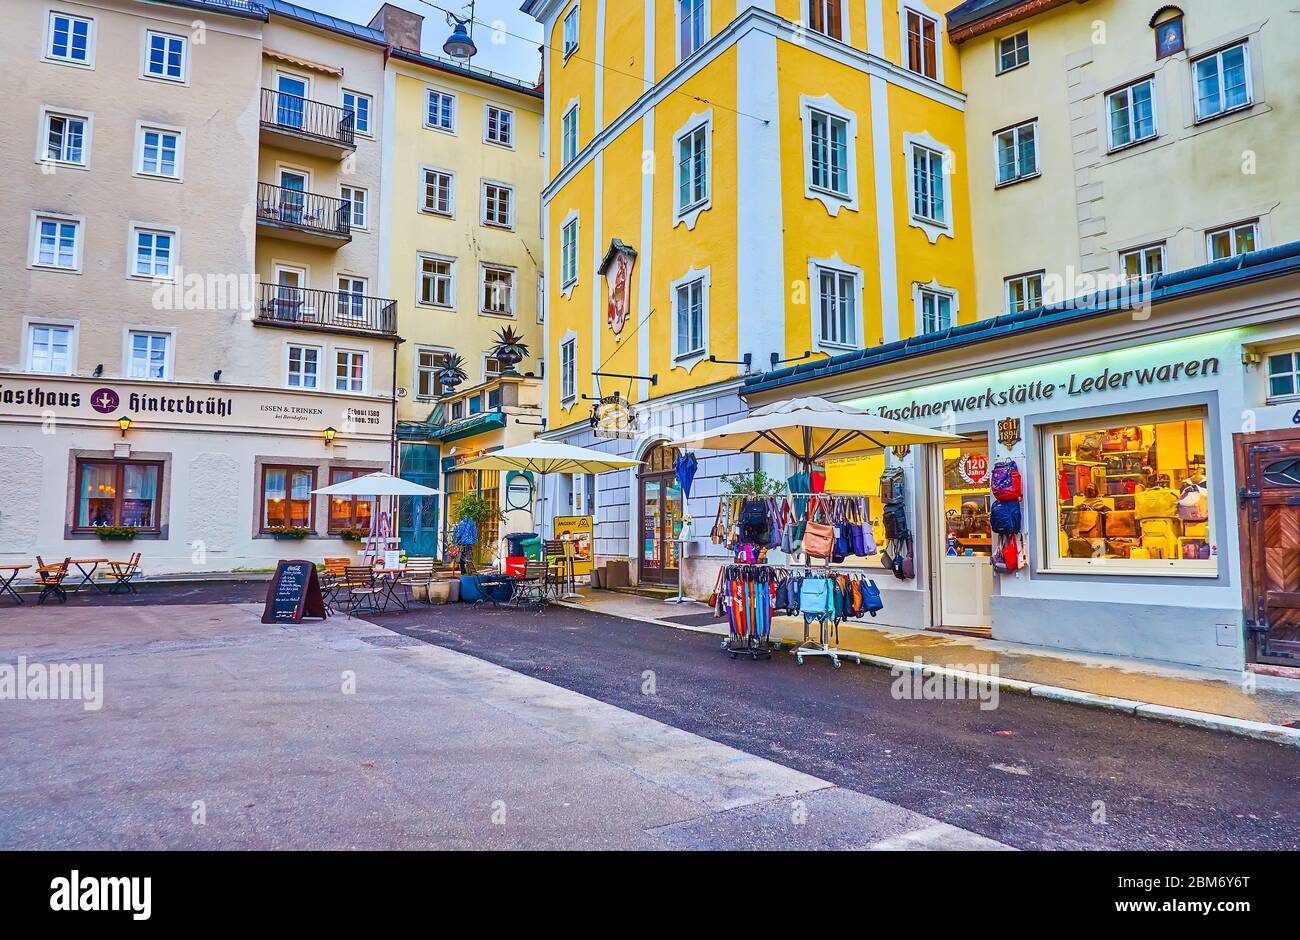 SALZBURG, AUSTRIA - MARCH 1, 2019: Walk in the heart of Kaiviertel neighborhood of Altstadt (Old Town) and observe local shops and cafes, on March 1 i Stock Photo